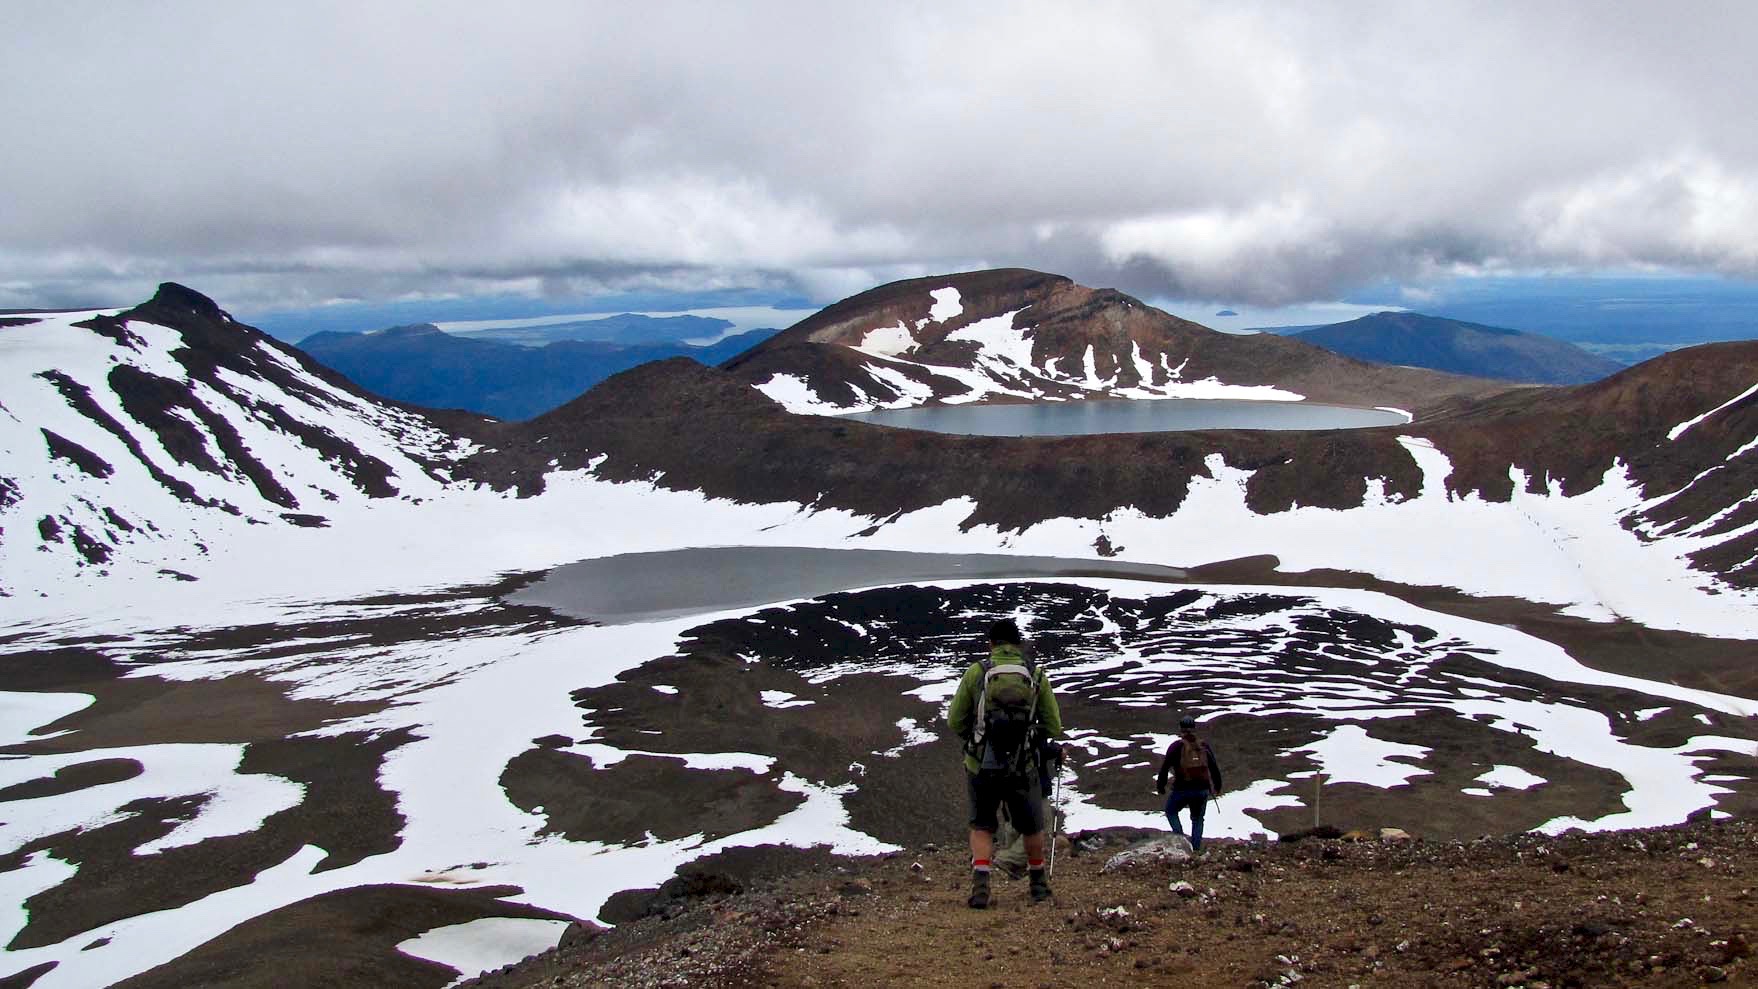 View of hikers on snow-covered volcano in New Zealand, taken by The Thousand-Miler